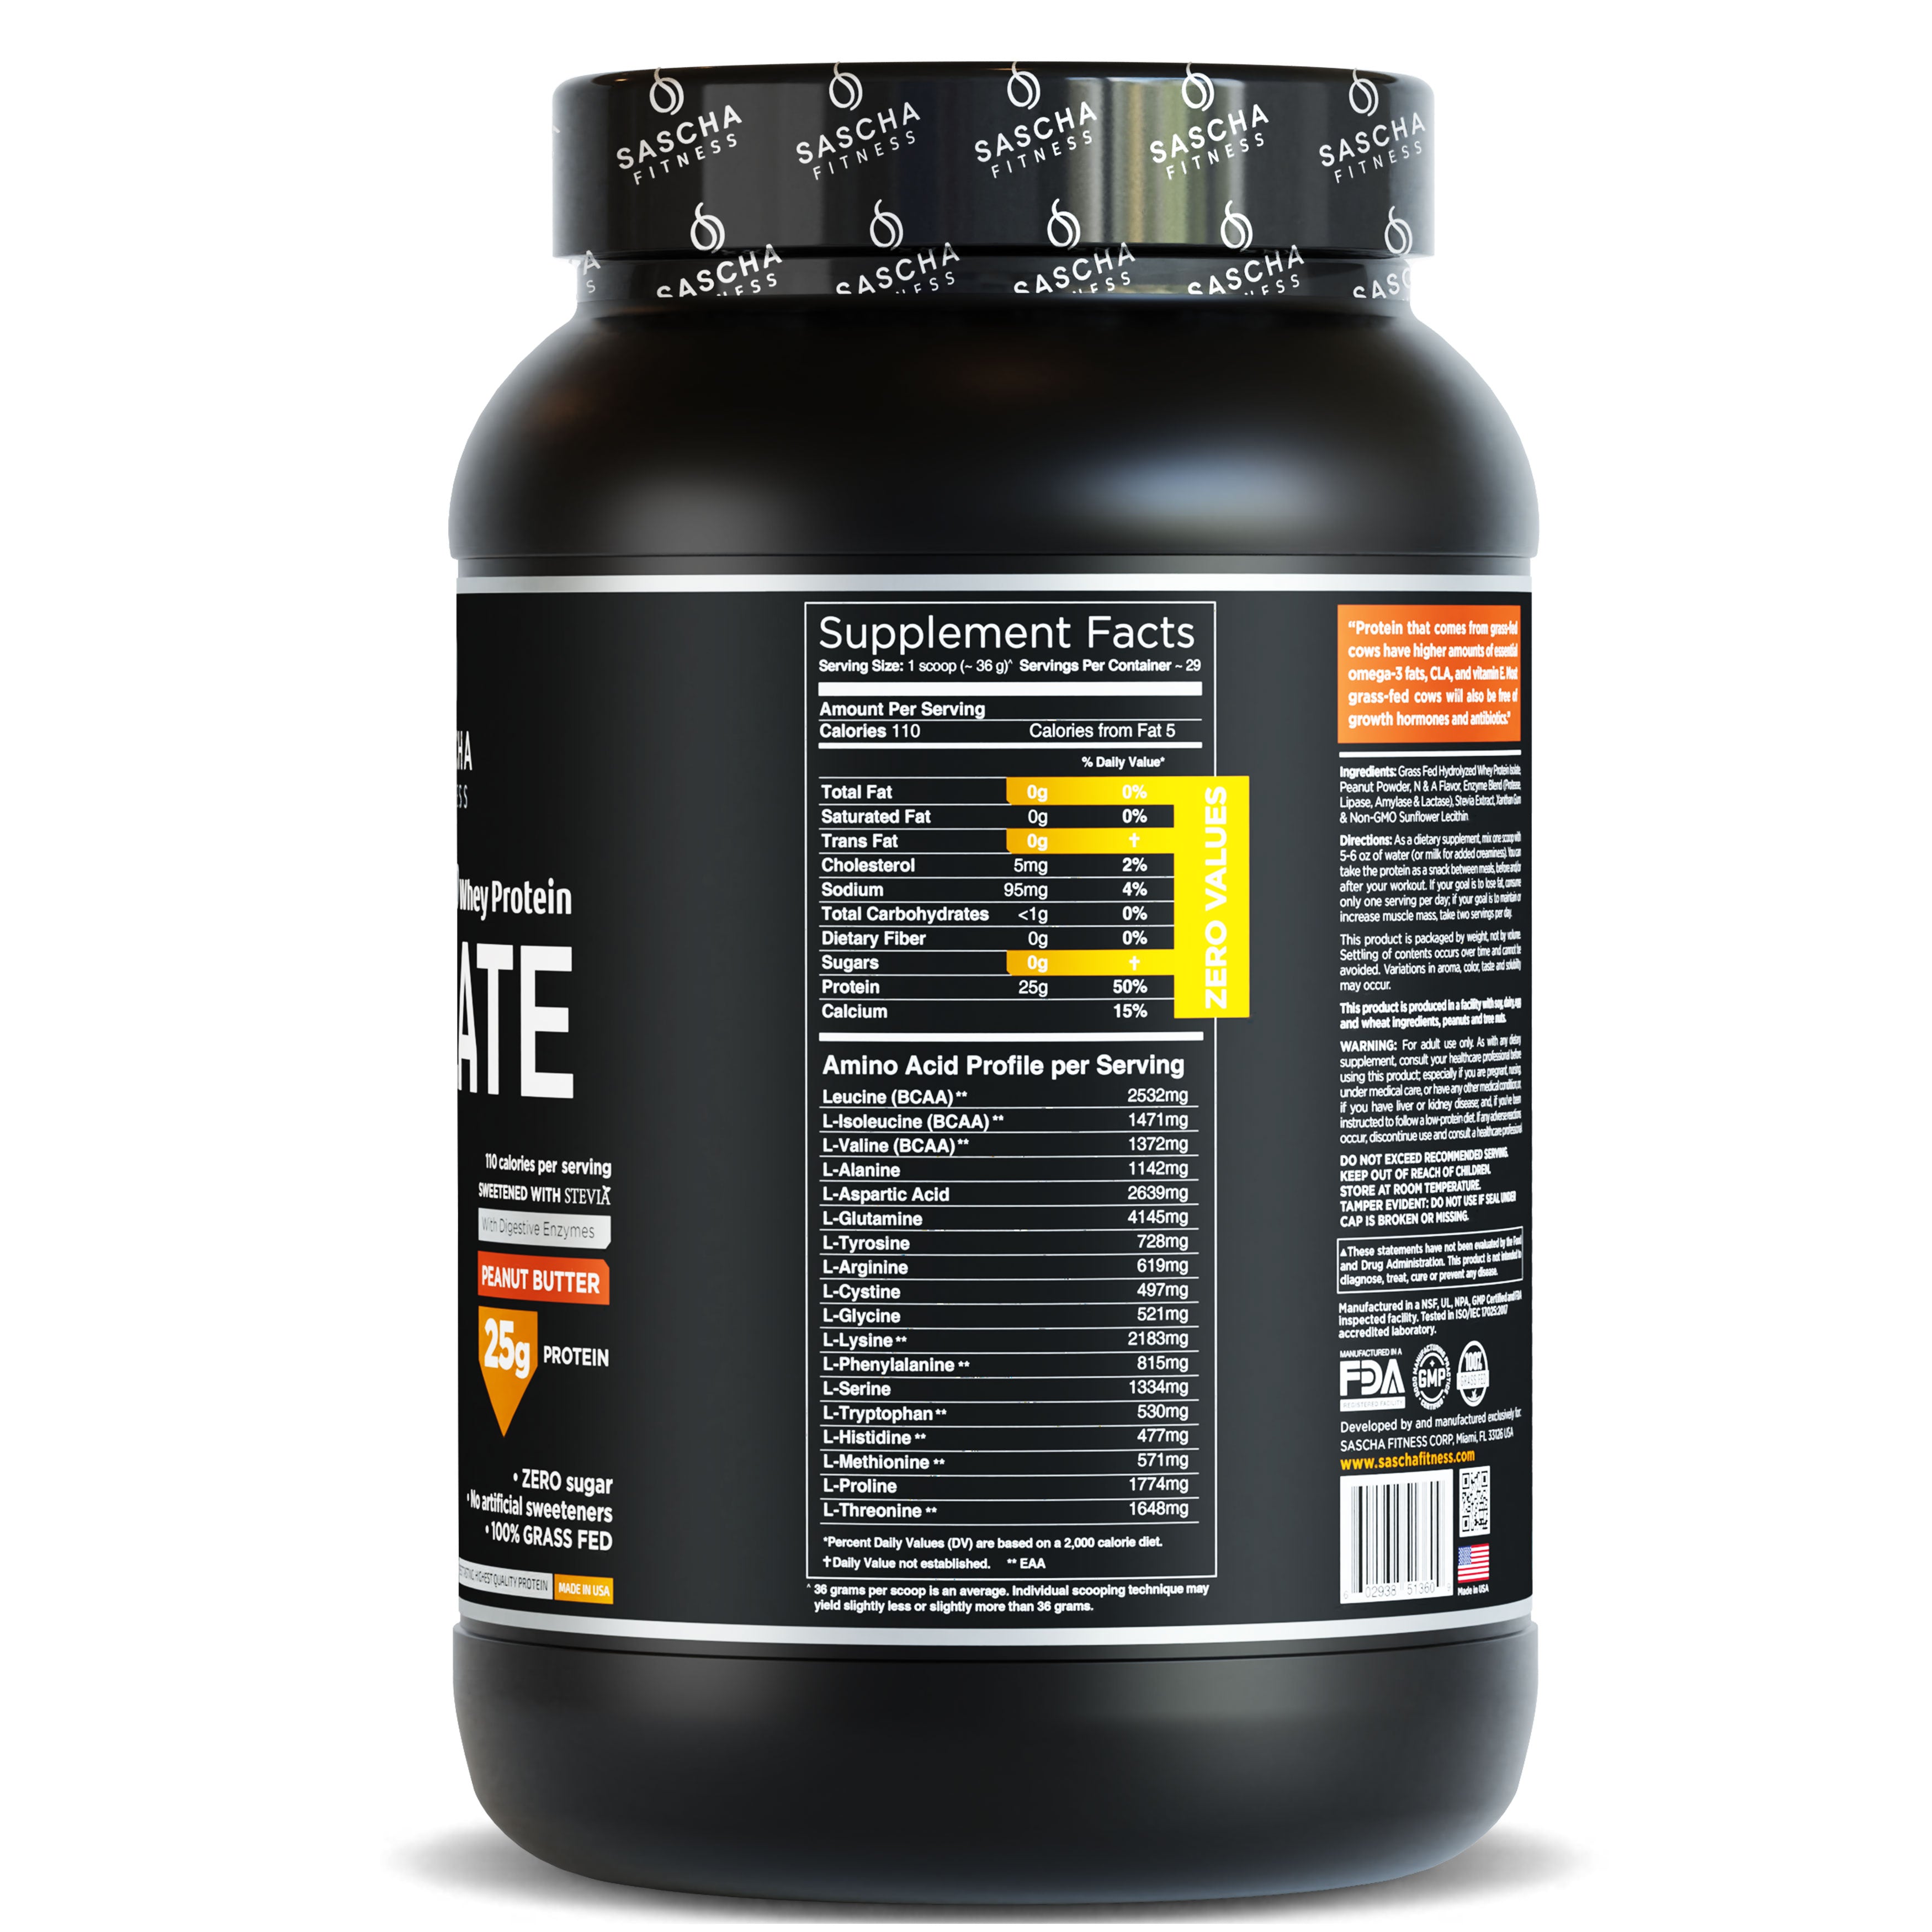 ISOLATE Hydrolyzed Whey Protein - Mantequilla de Maní